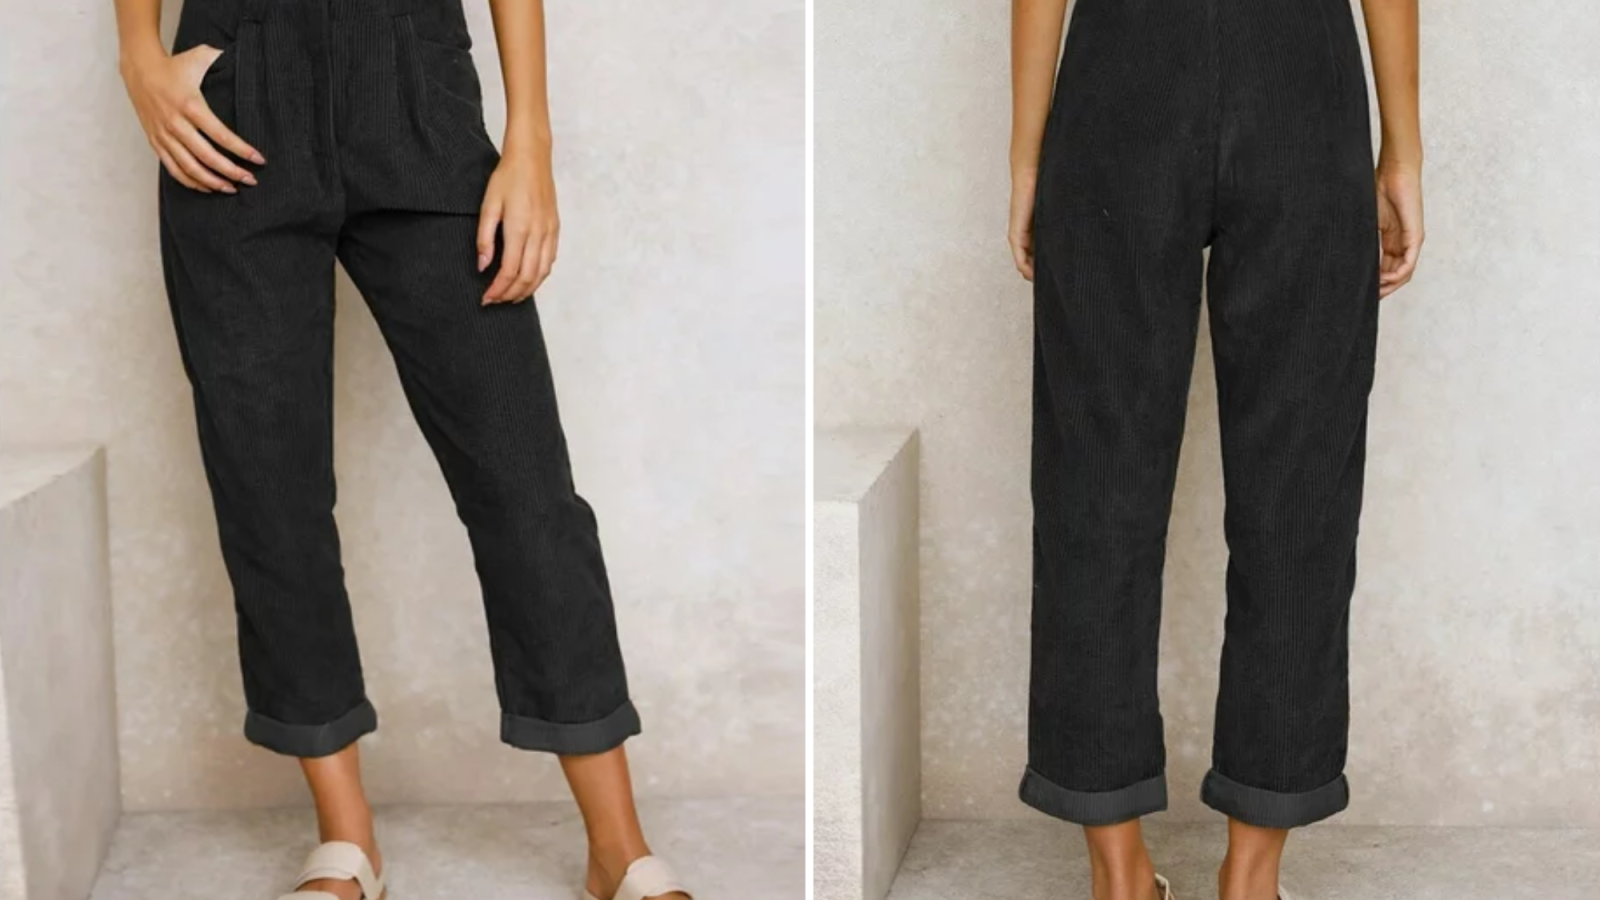 Pair These Retro Corduroy Pants for a Casual Spring Look